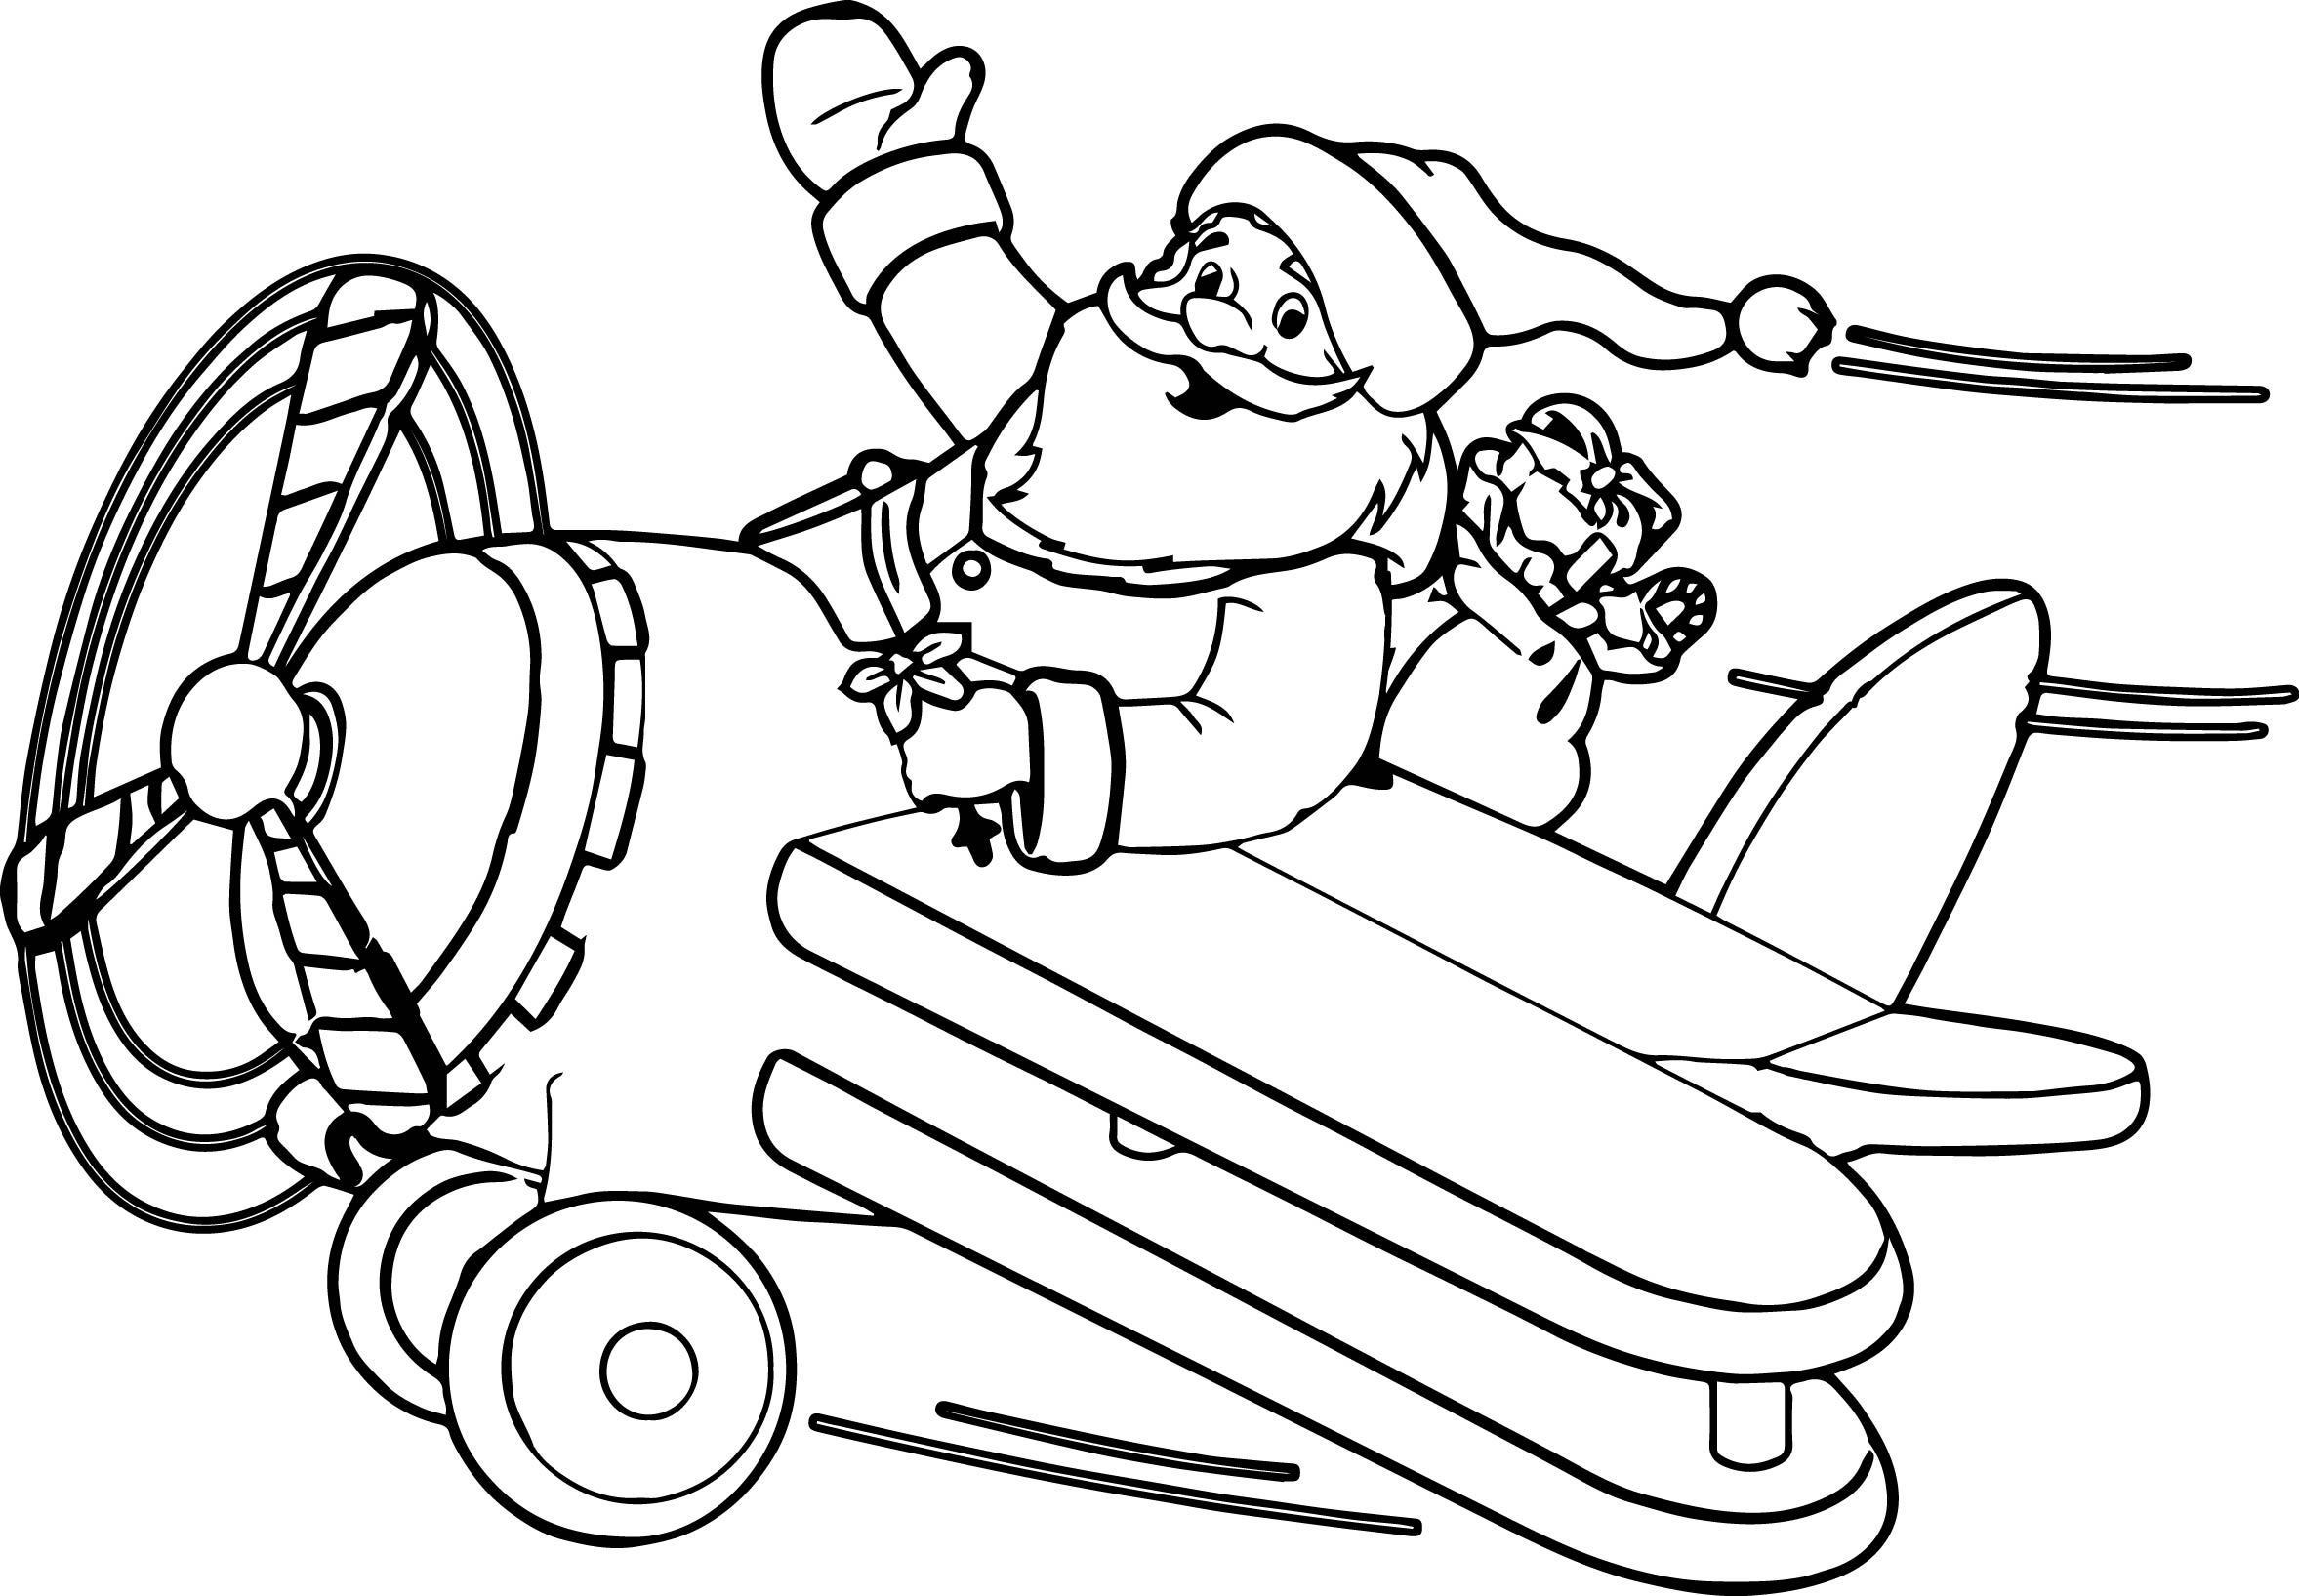 Cartoon Airplane Coloring Pages at GetColoringscom Free